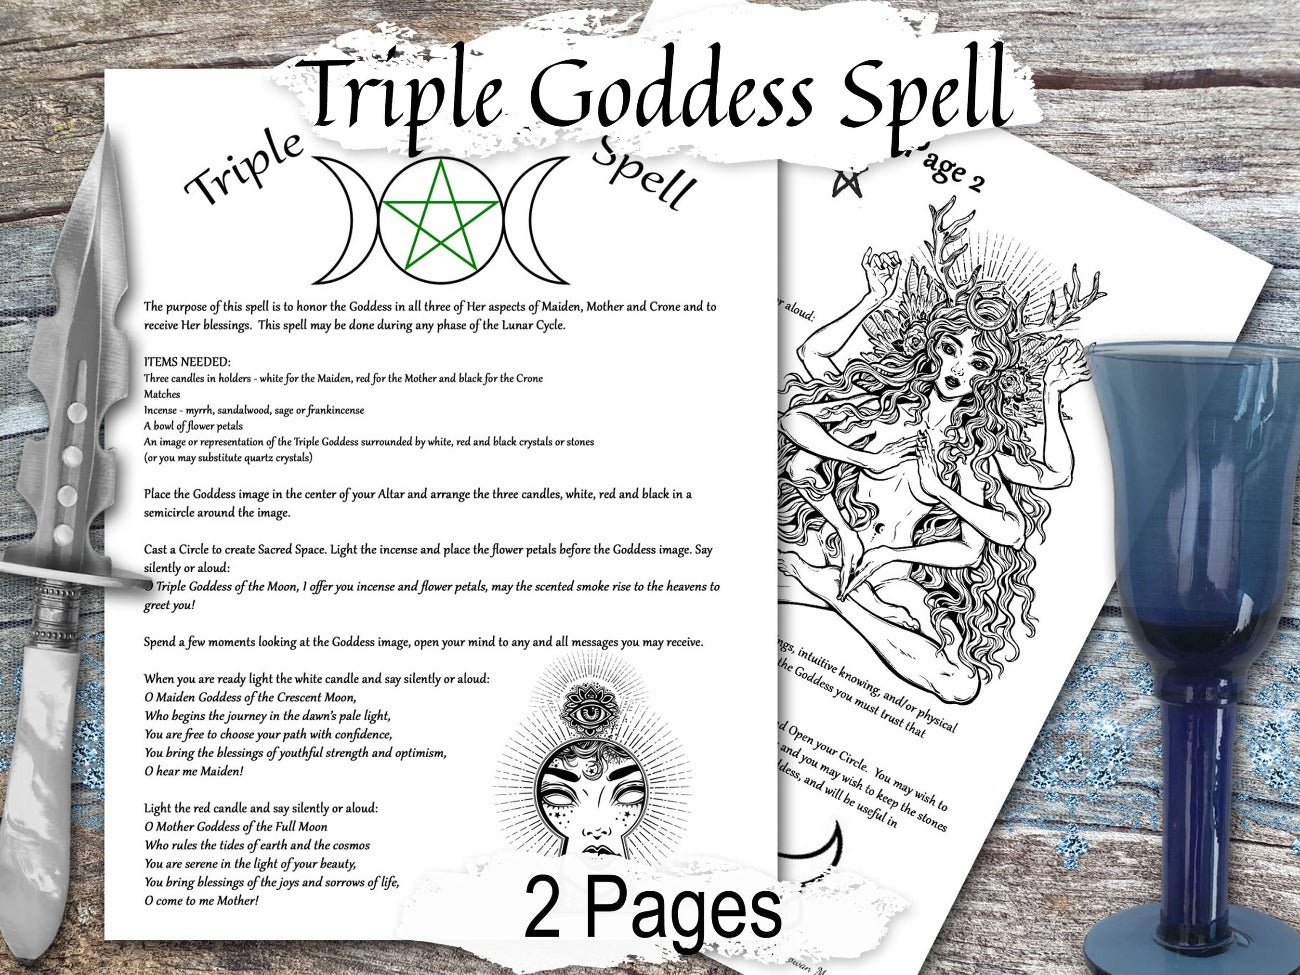 TRIPLE GODDESS, Blessing Spell, 2 Pages, Witchcraft Goddess Spell, Wicca Goddess Magic, Maiden Mother Crone, Cast a Witch Moon Spell - Morgana Magick Spell